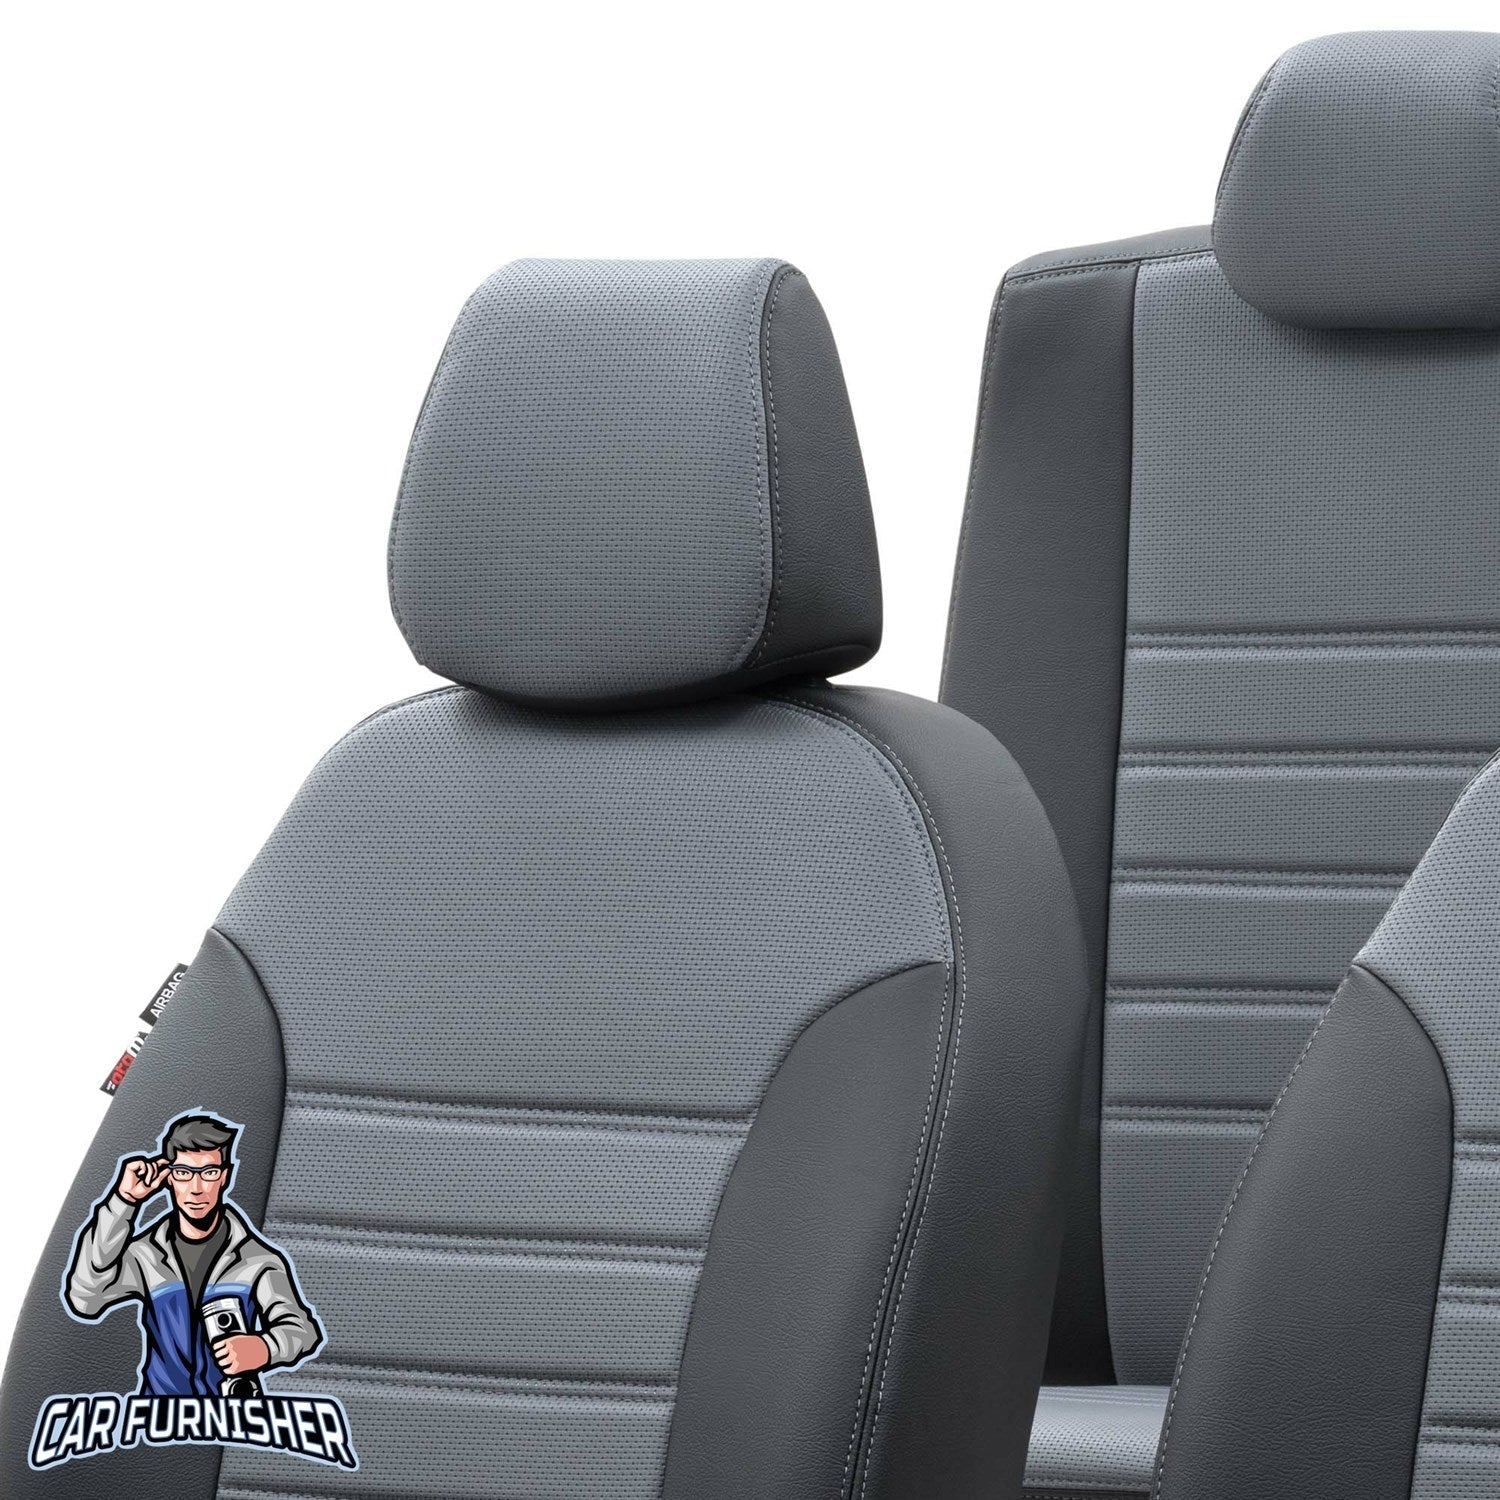 Chevrolet Captiva Seat Cover New York Leather Design Smoked Black Leather